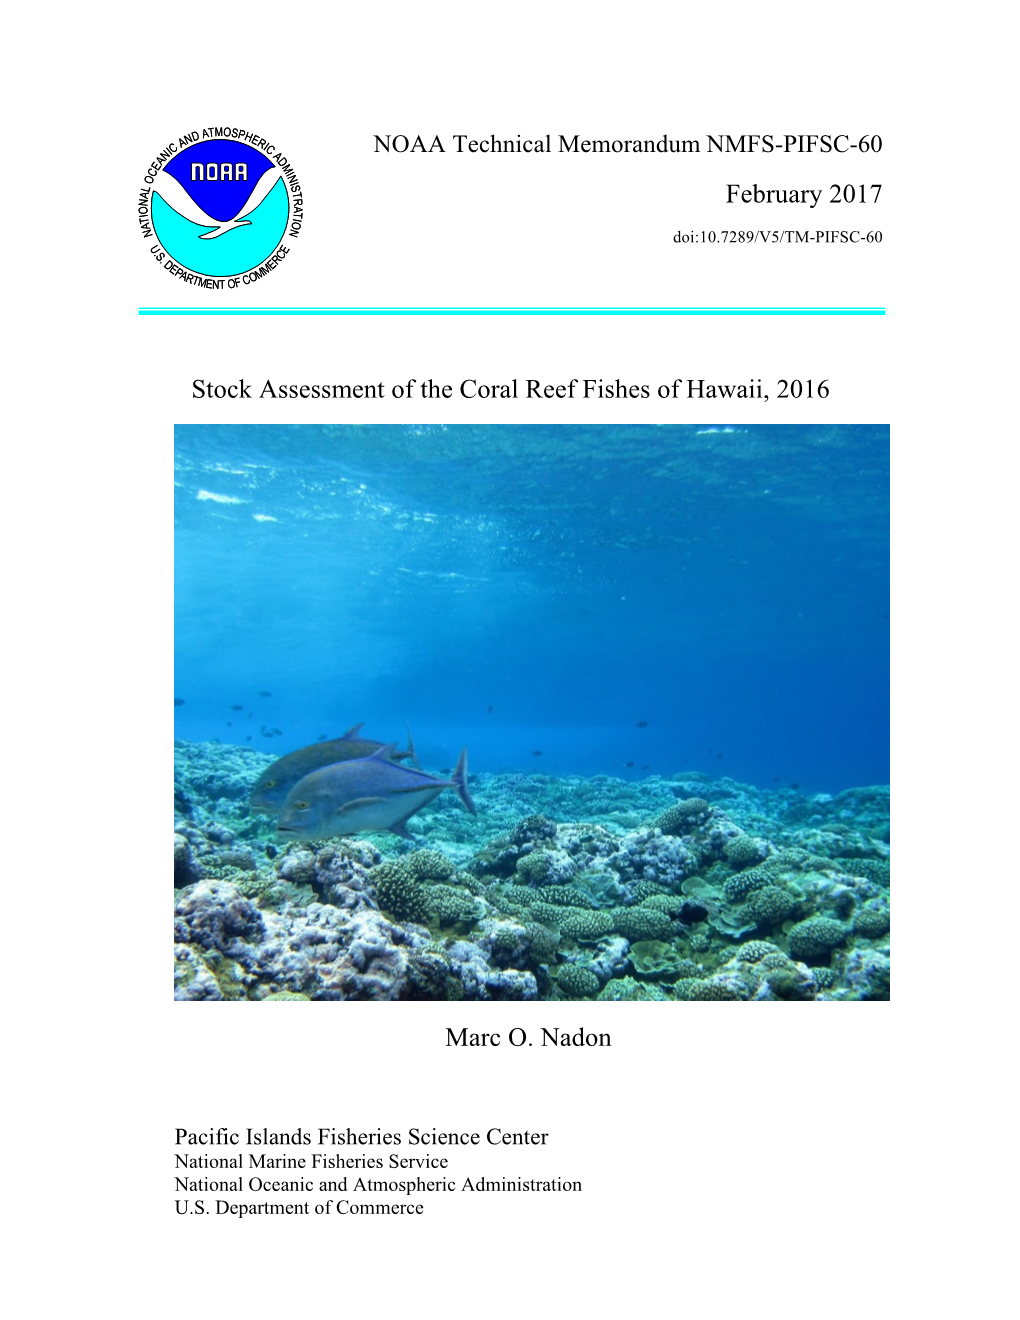 February 2017 Stock Assessment of the Coral Reef Fishes of Hawaii